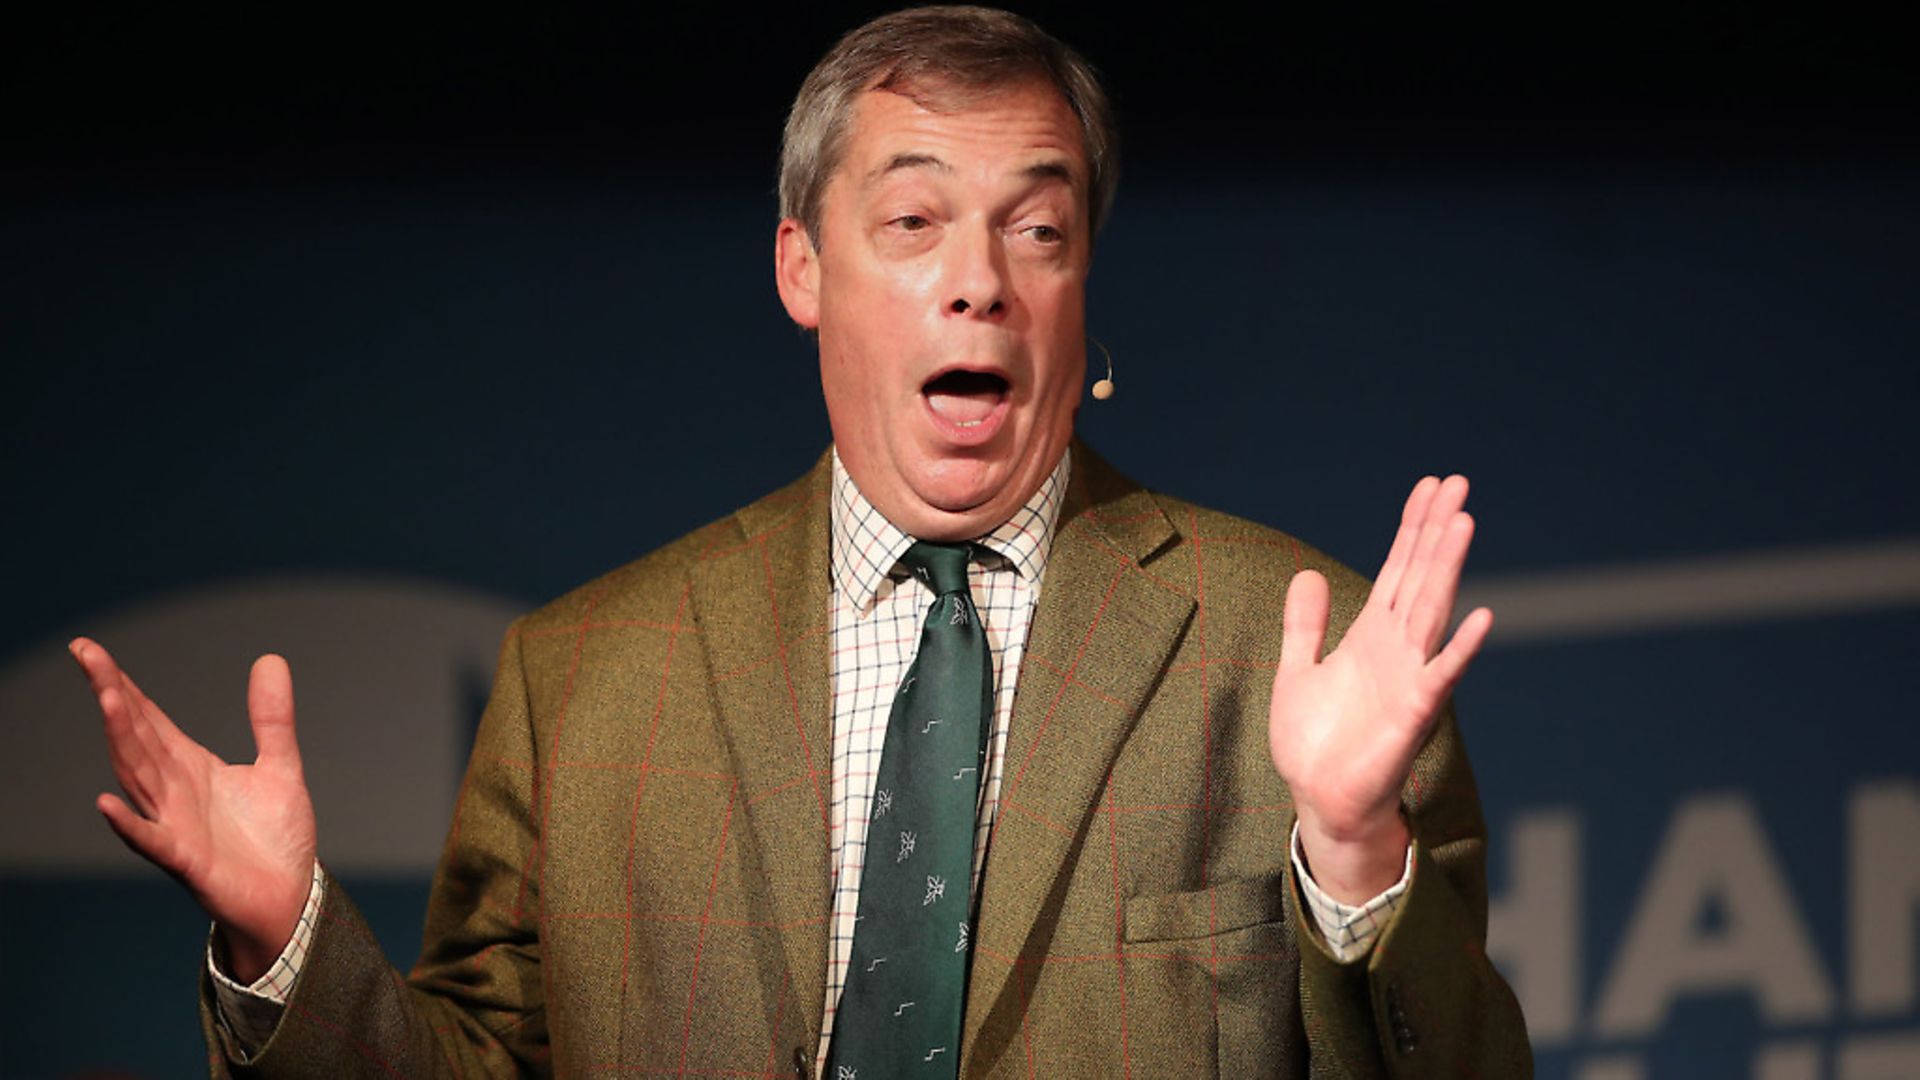 Nigel Farages party claimed they stepped back out of concern that the broadcaster will not conduct the debate in a fair and objective way. Photo: Danny Lawson/PA Wire - Credit: PA